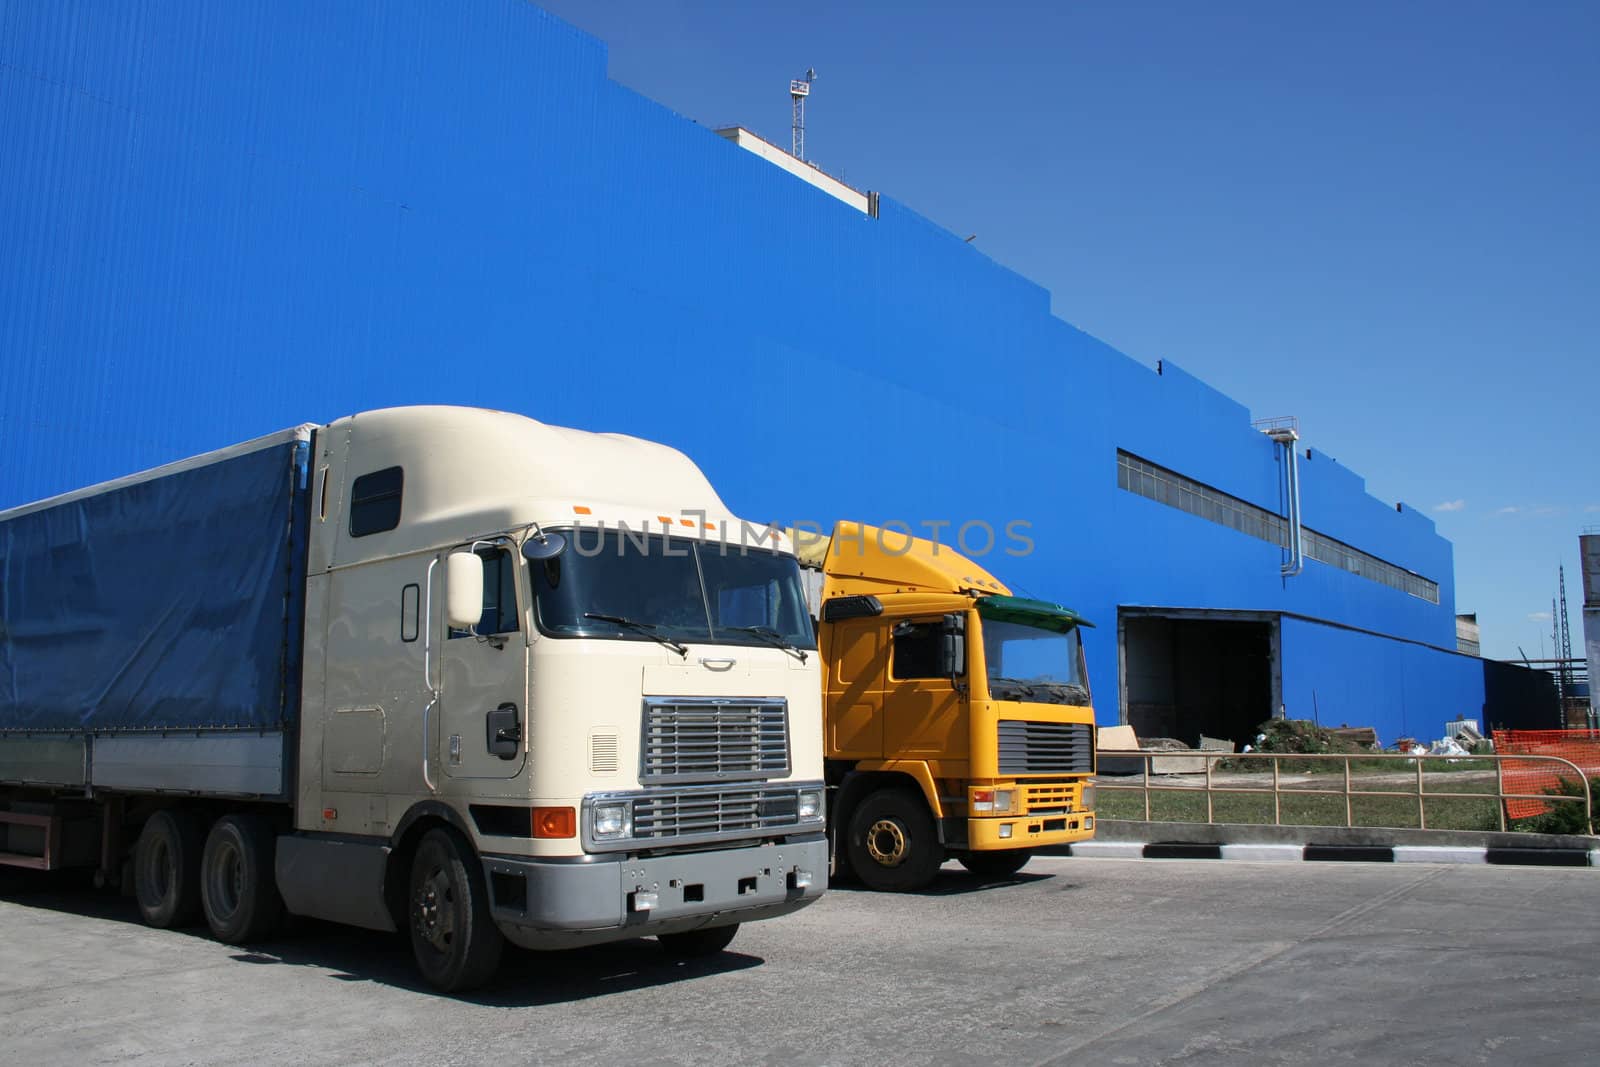 lorries on a background of a dark blue warehouse